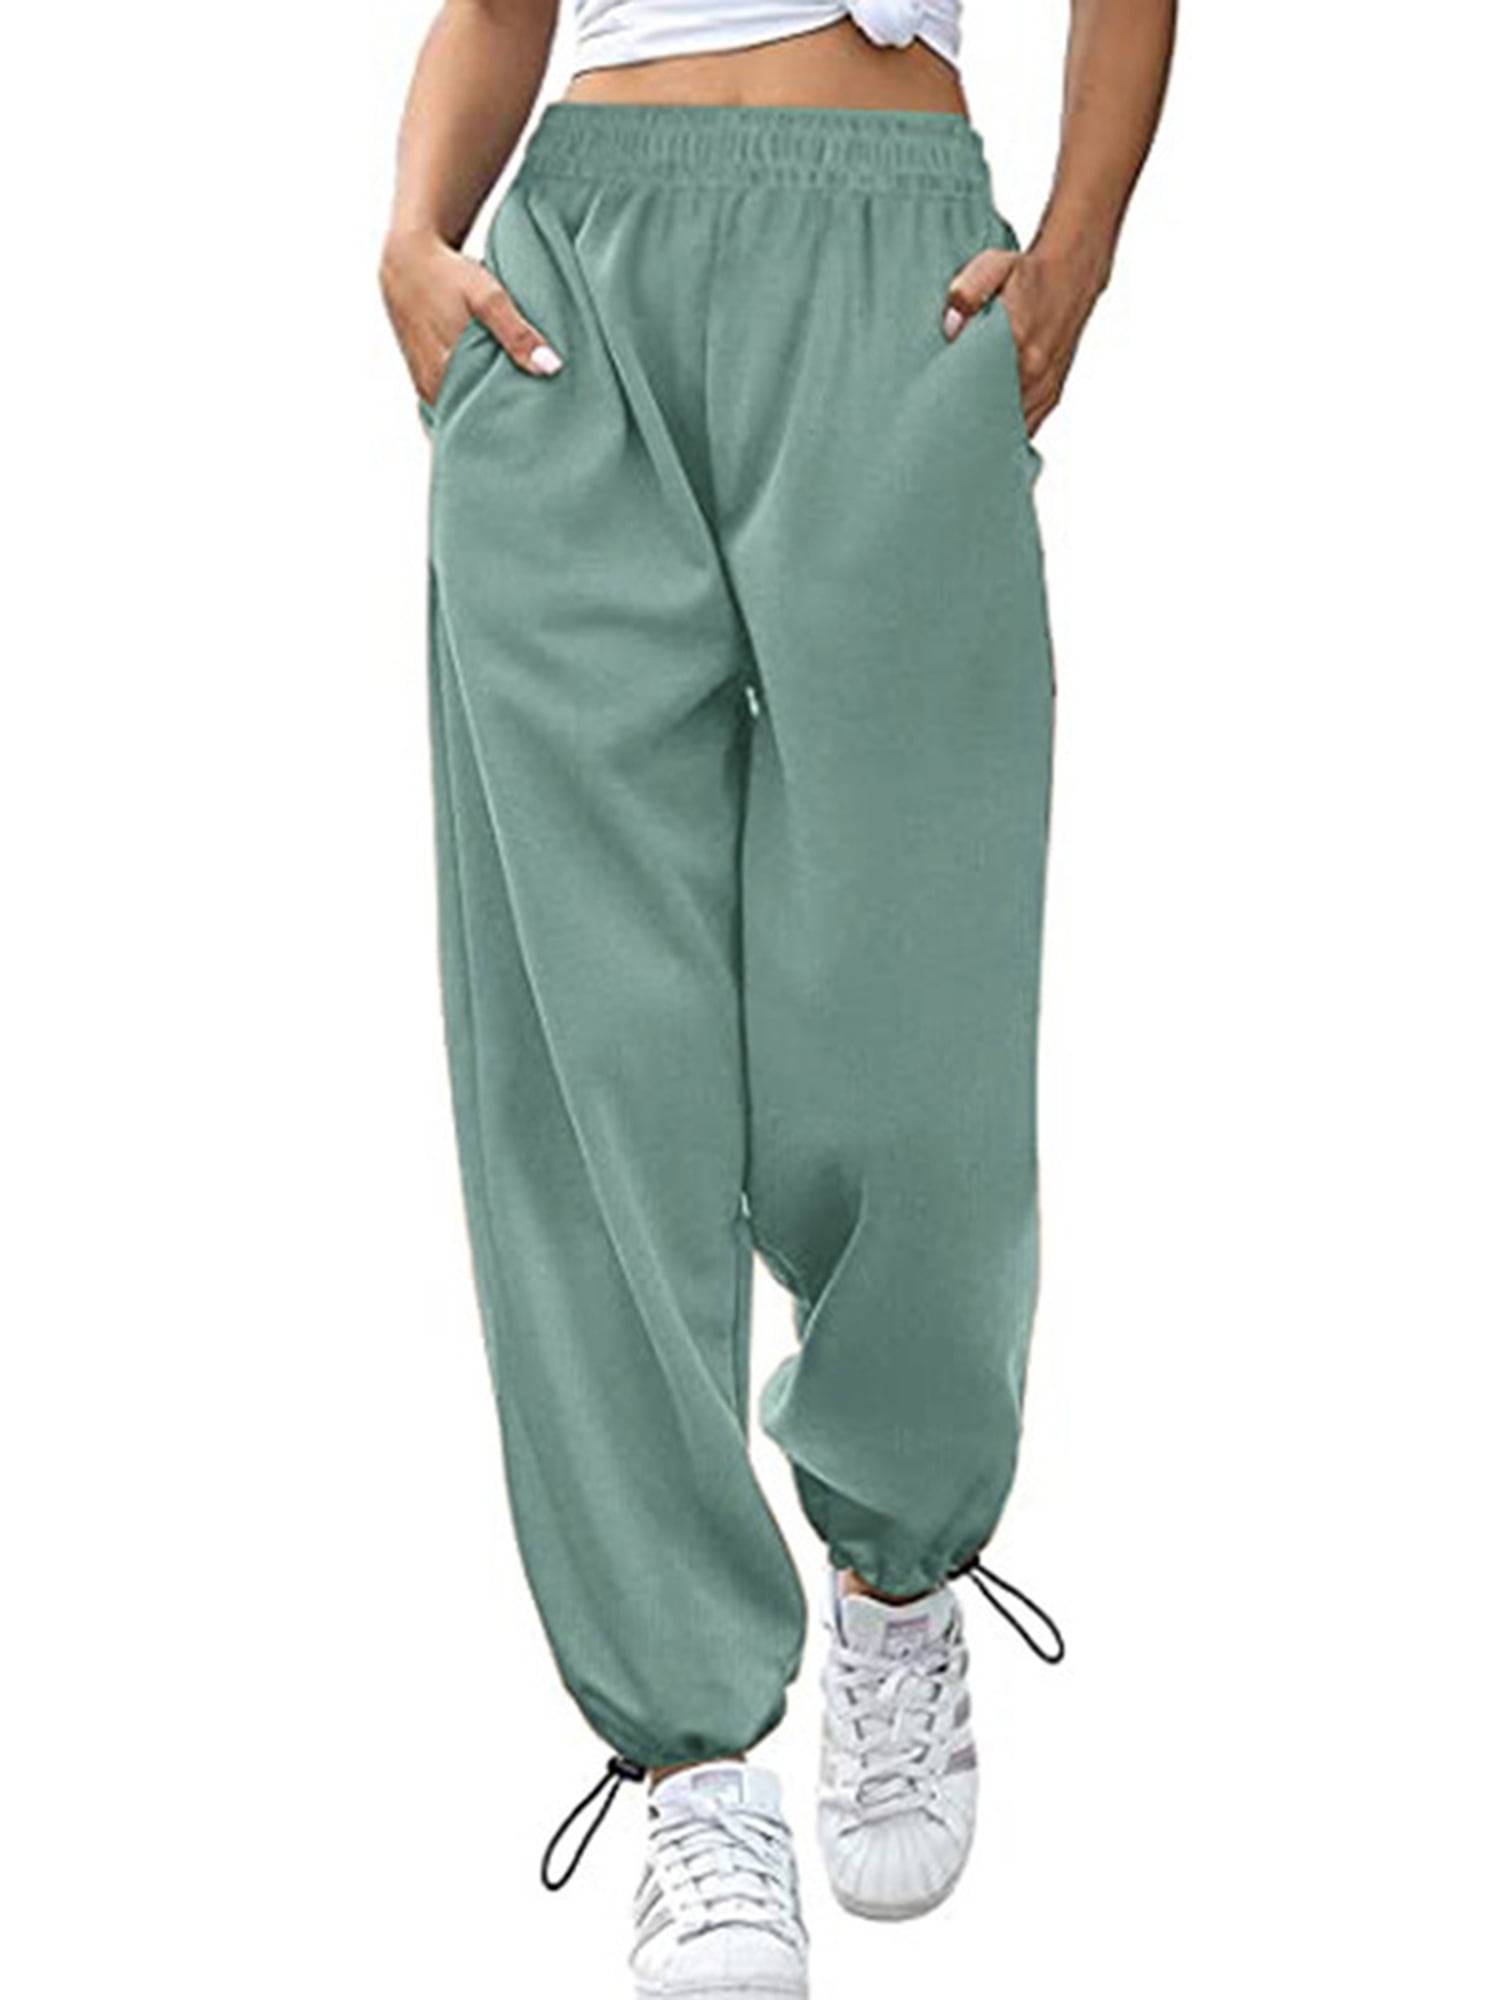 SANTINY Women's Fleece Lined Joggers Water Resistant High Waisted